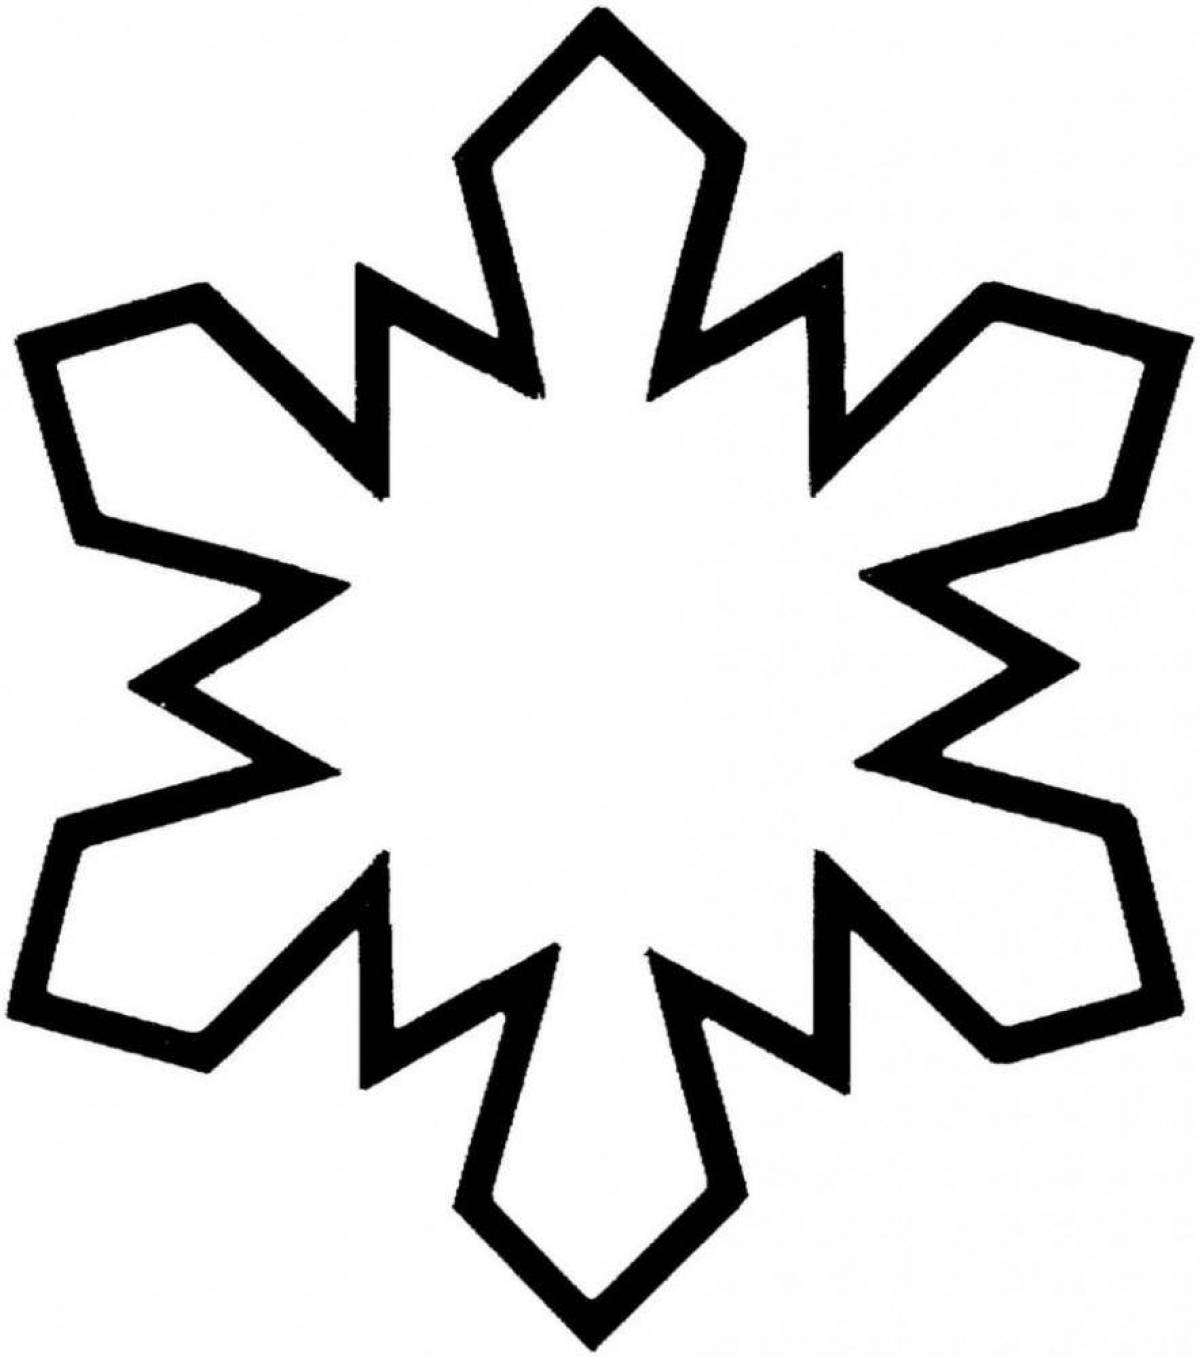 Awesome snowflake coloring book for kids